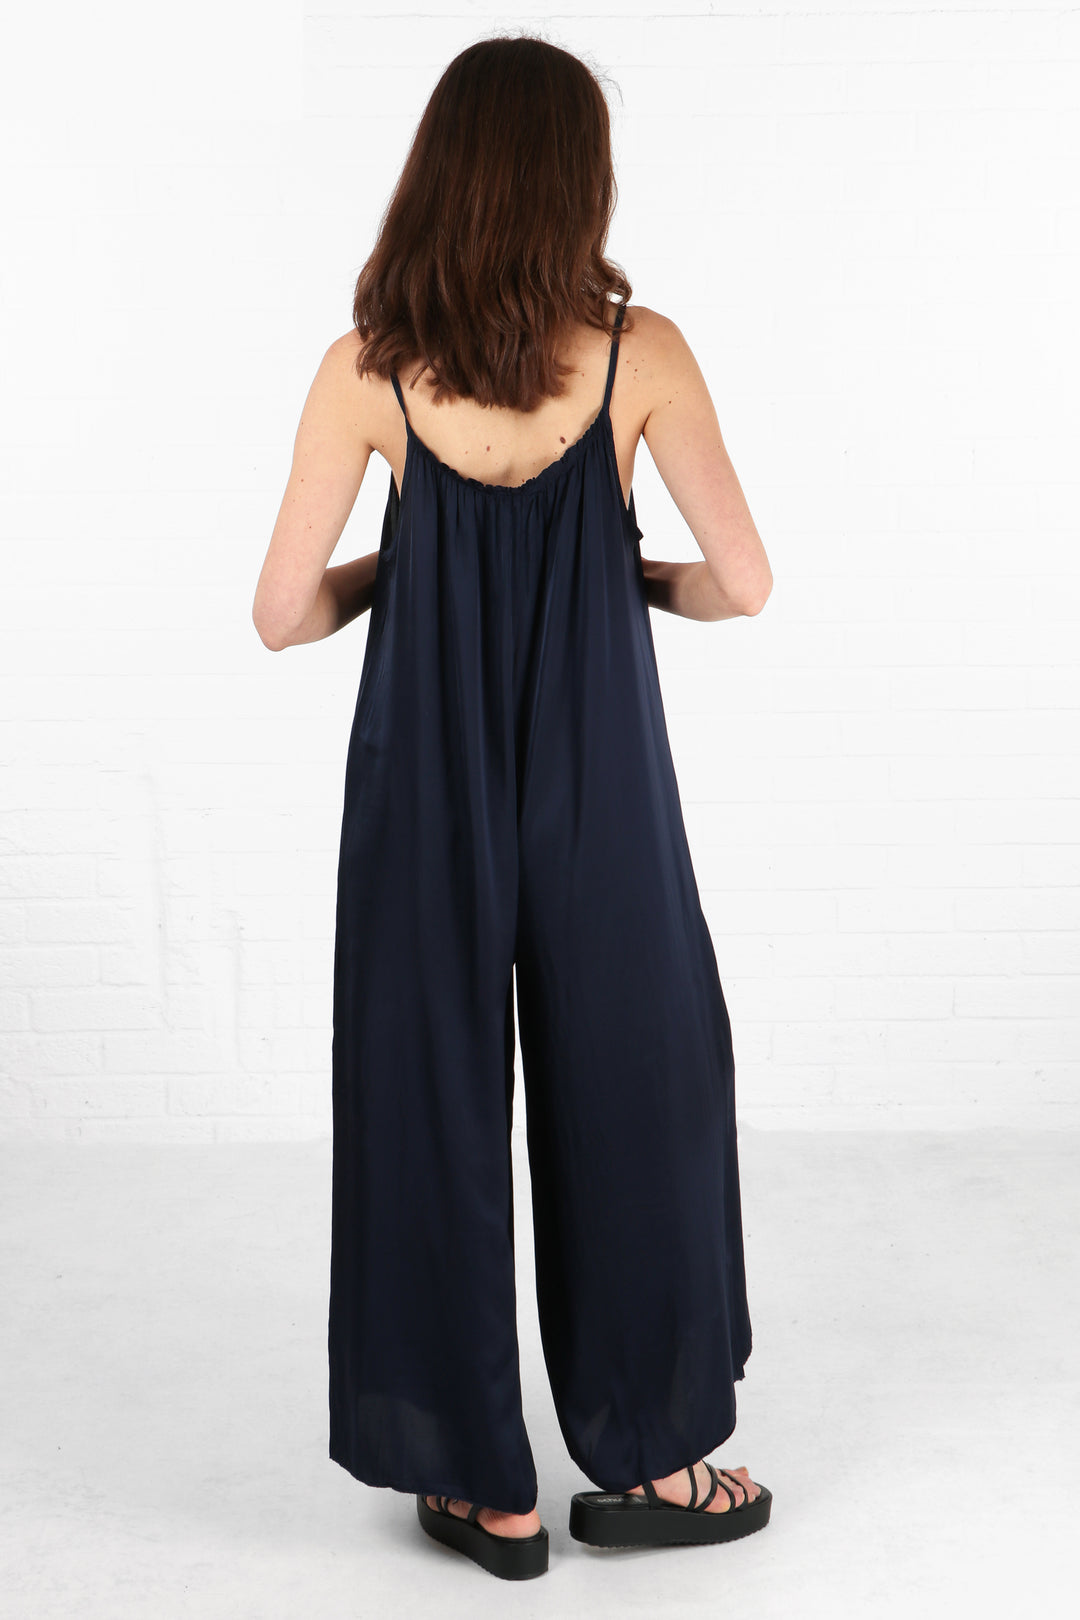 model showing the back of the navy blue jumpsuit showing the scoop neck design at the back